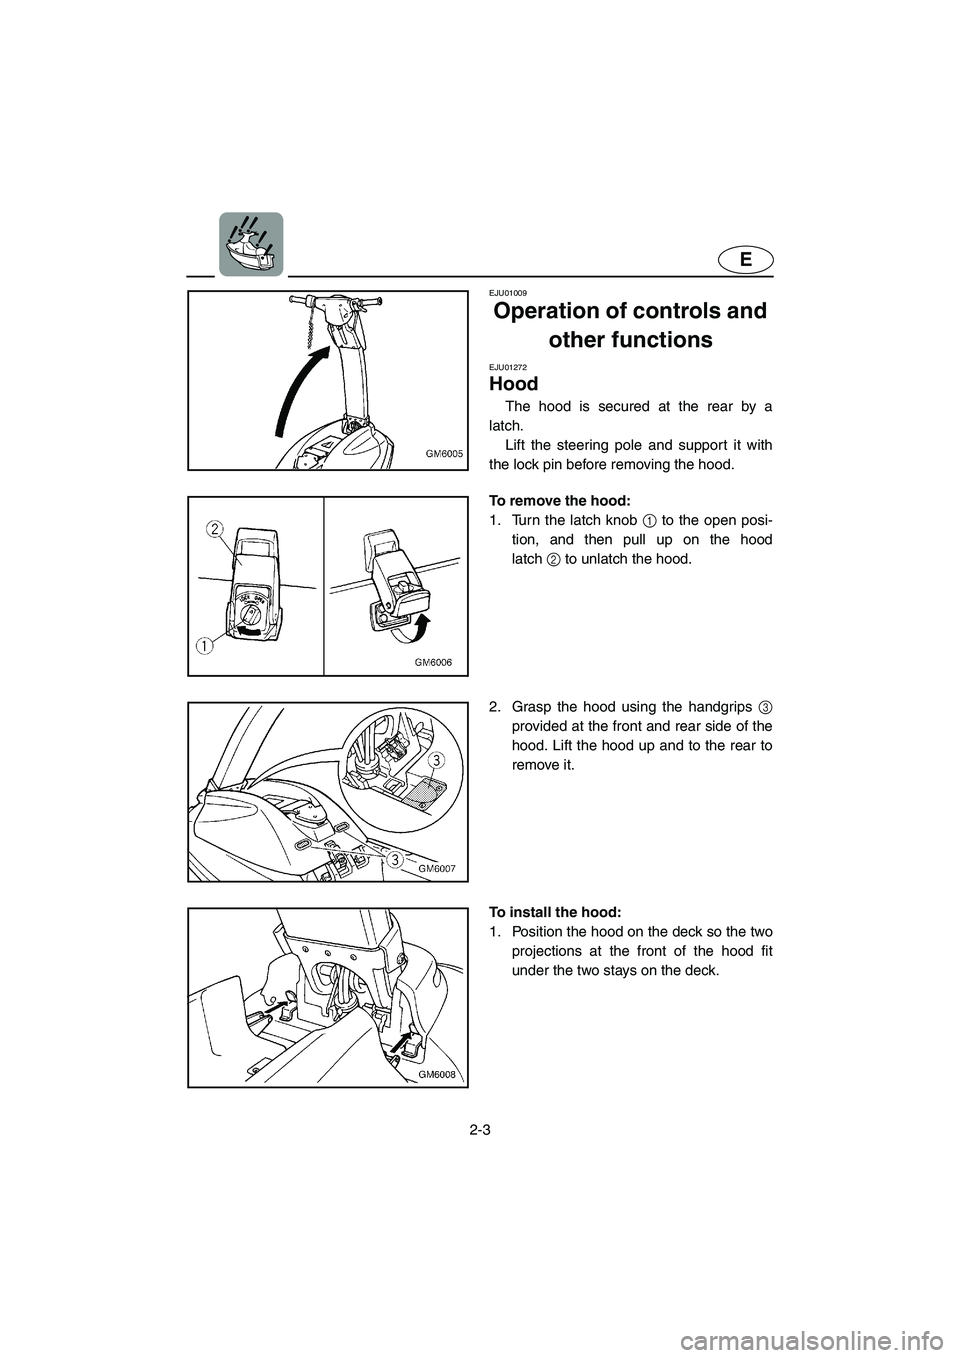 YAMAHA SUPERJET 2002  Owners Manual 2-3
E
EJU01009 
Operation of controls and 
other functions 
EJU01272 
Hood  
The hood is secured at the rear by a
latch. 
Lift the steering pole and support it with
the lock pin before removing the ho